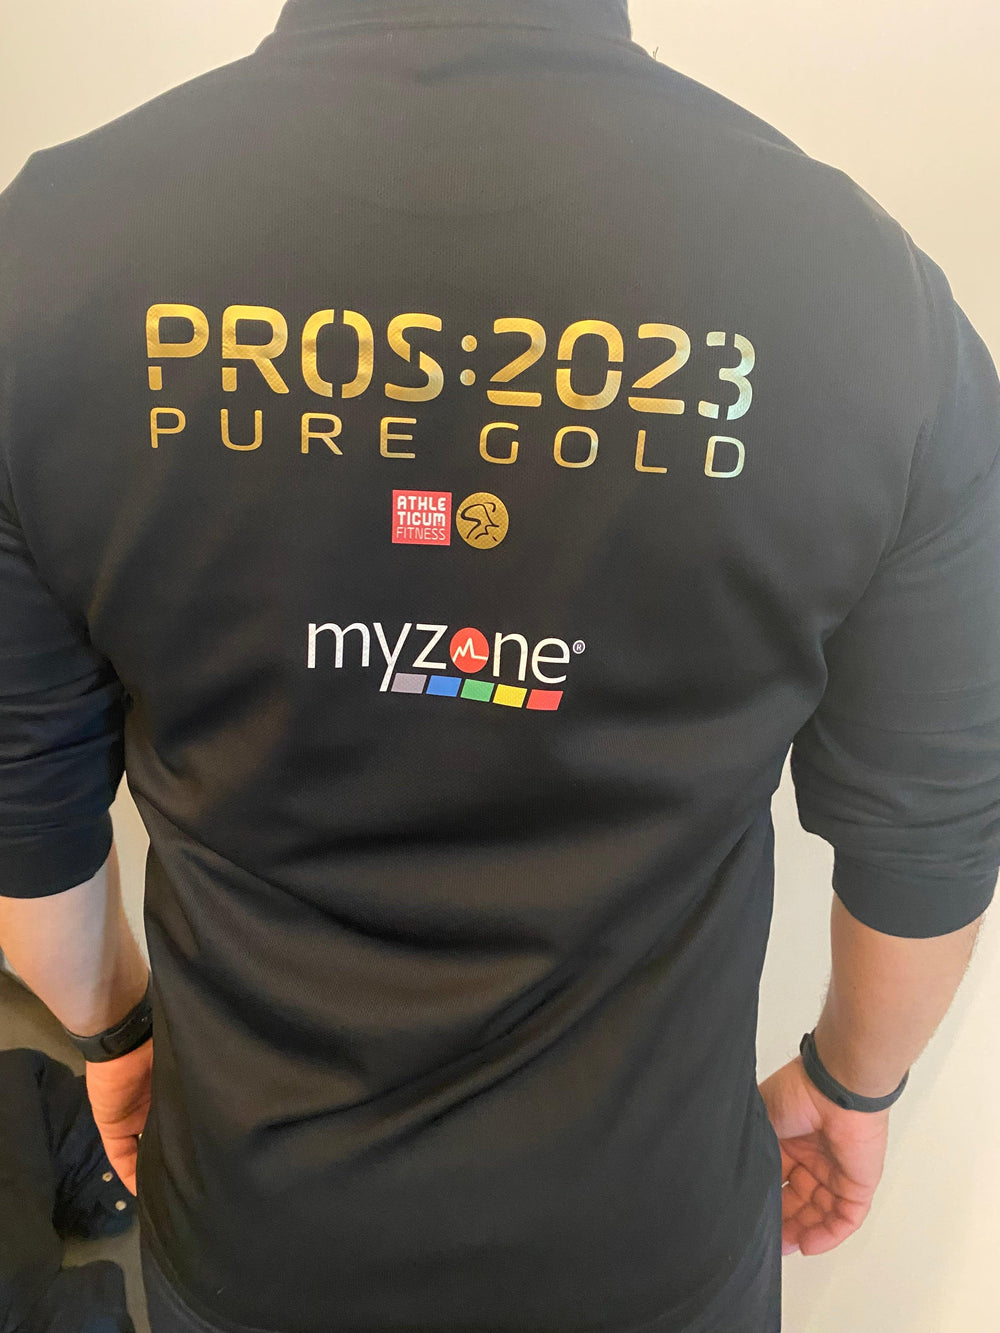 PROS:2023 Technical T-Shirts MALE - Athleticum Fitness